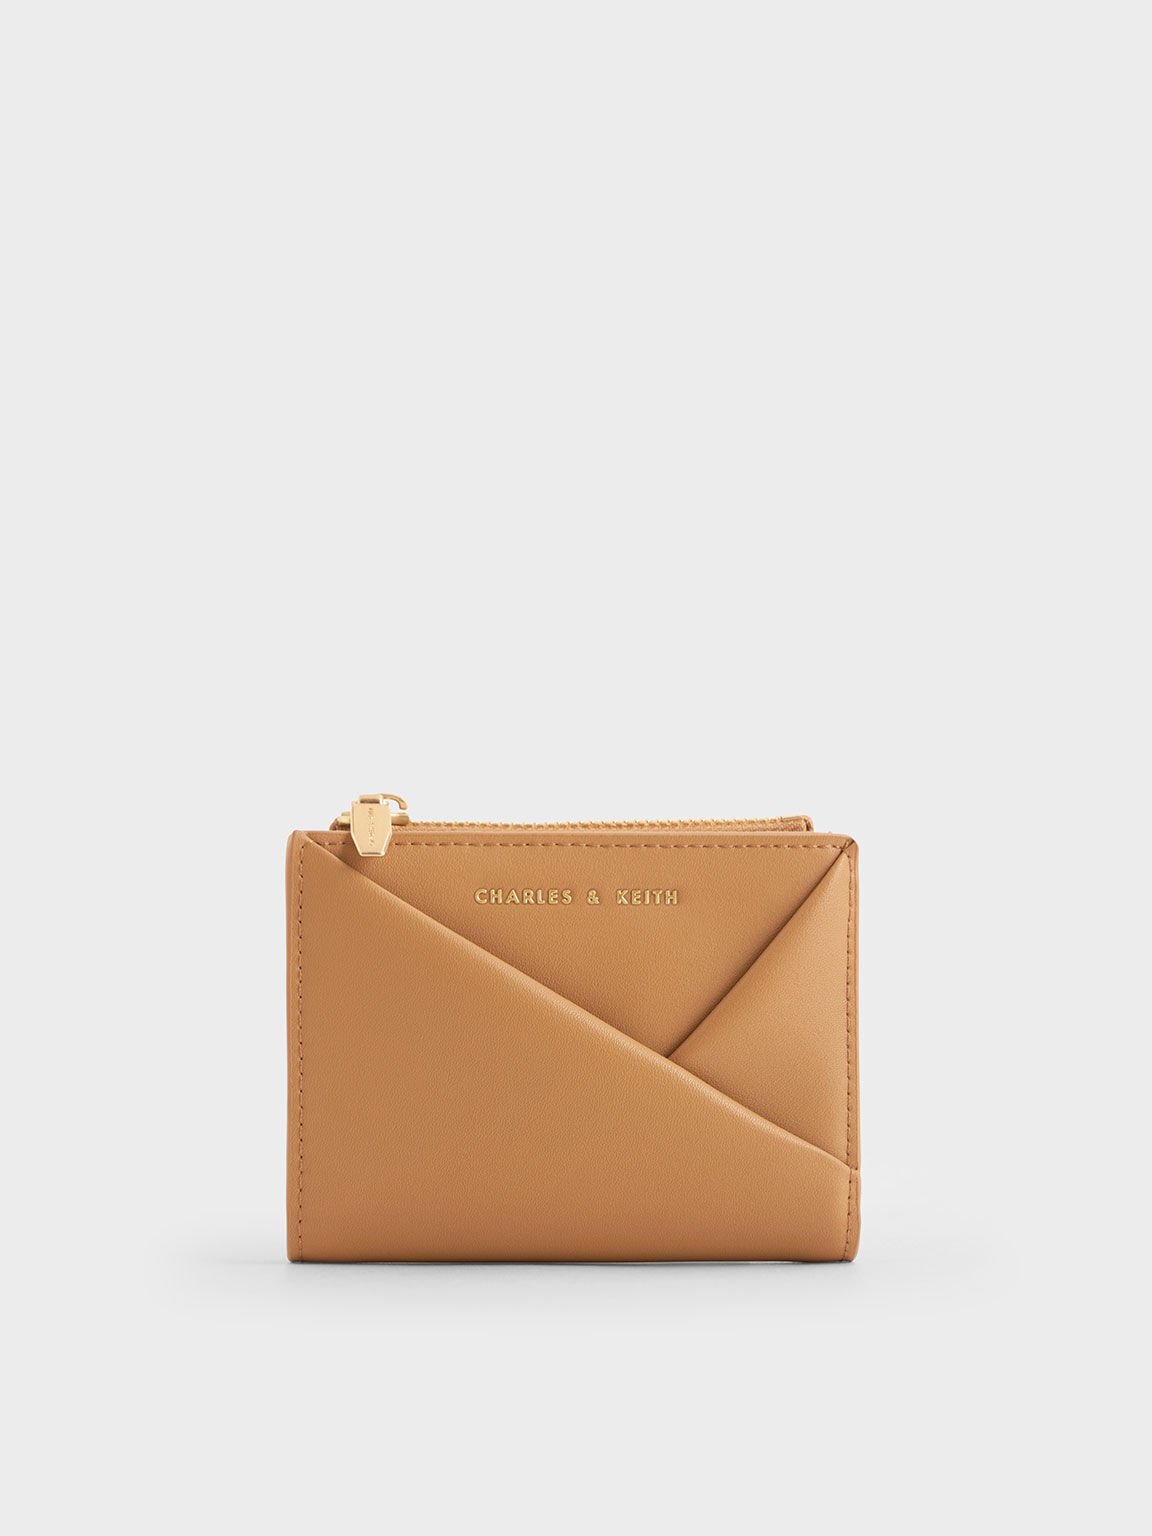 Women's Short & Small Wallets | Shop Online | CHARLES & KEITH US